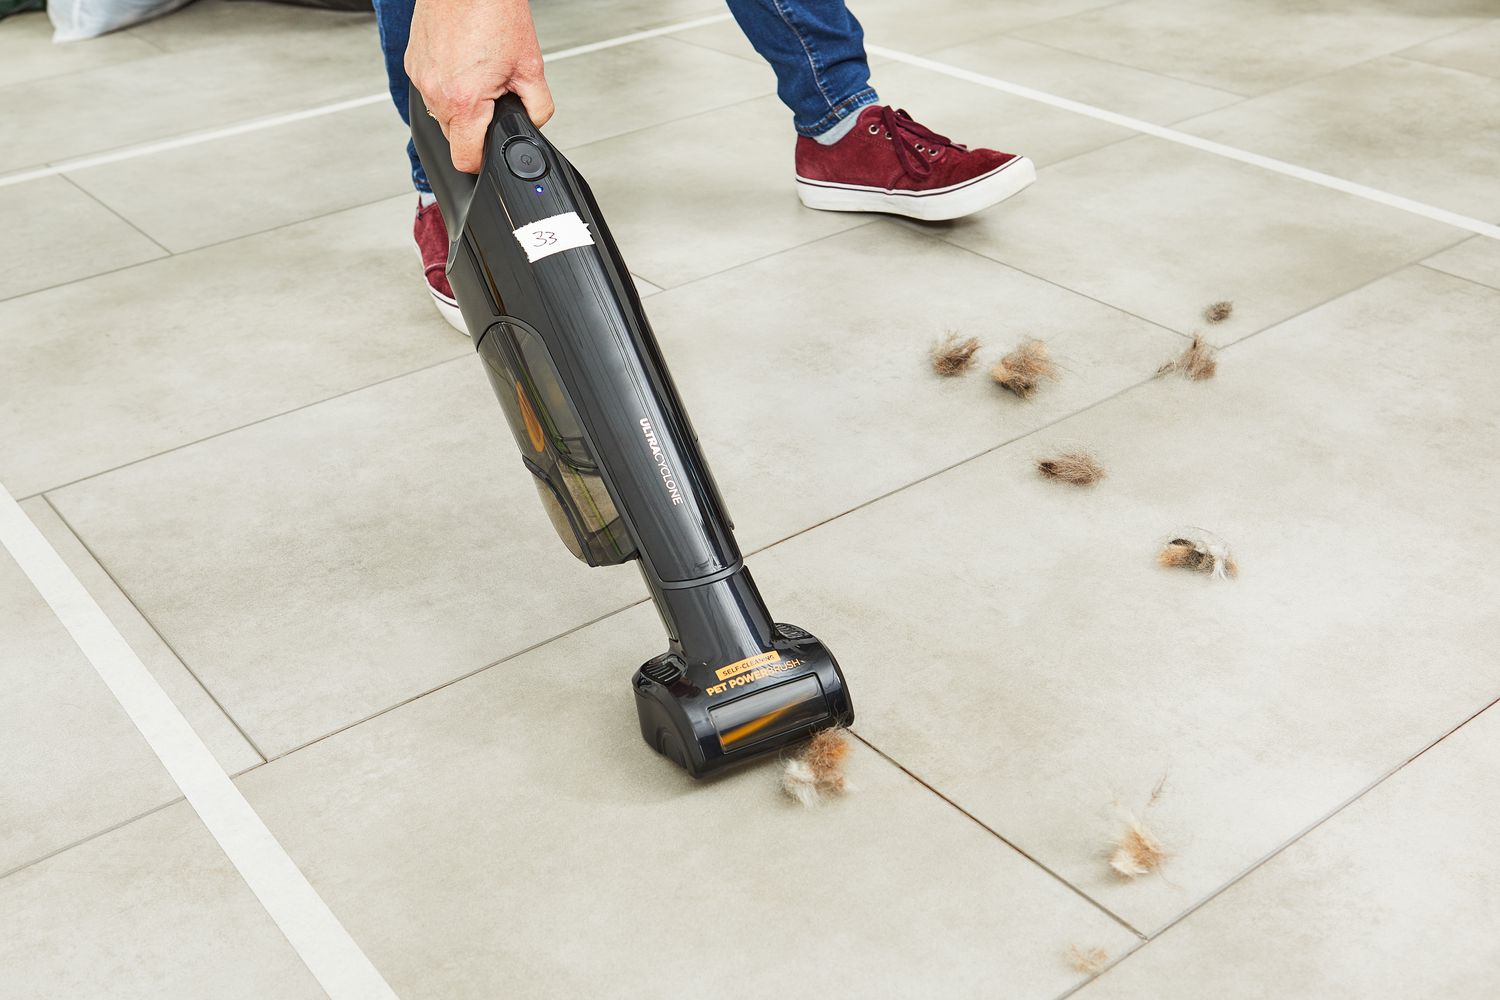 Shark UltraCyclone Pet Pro+ Cordless Handheld Vacuum used to clean the dust on the tile floor